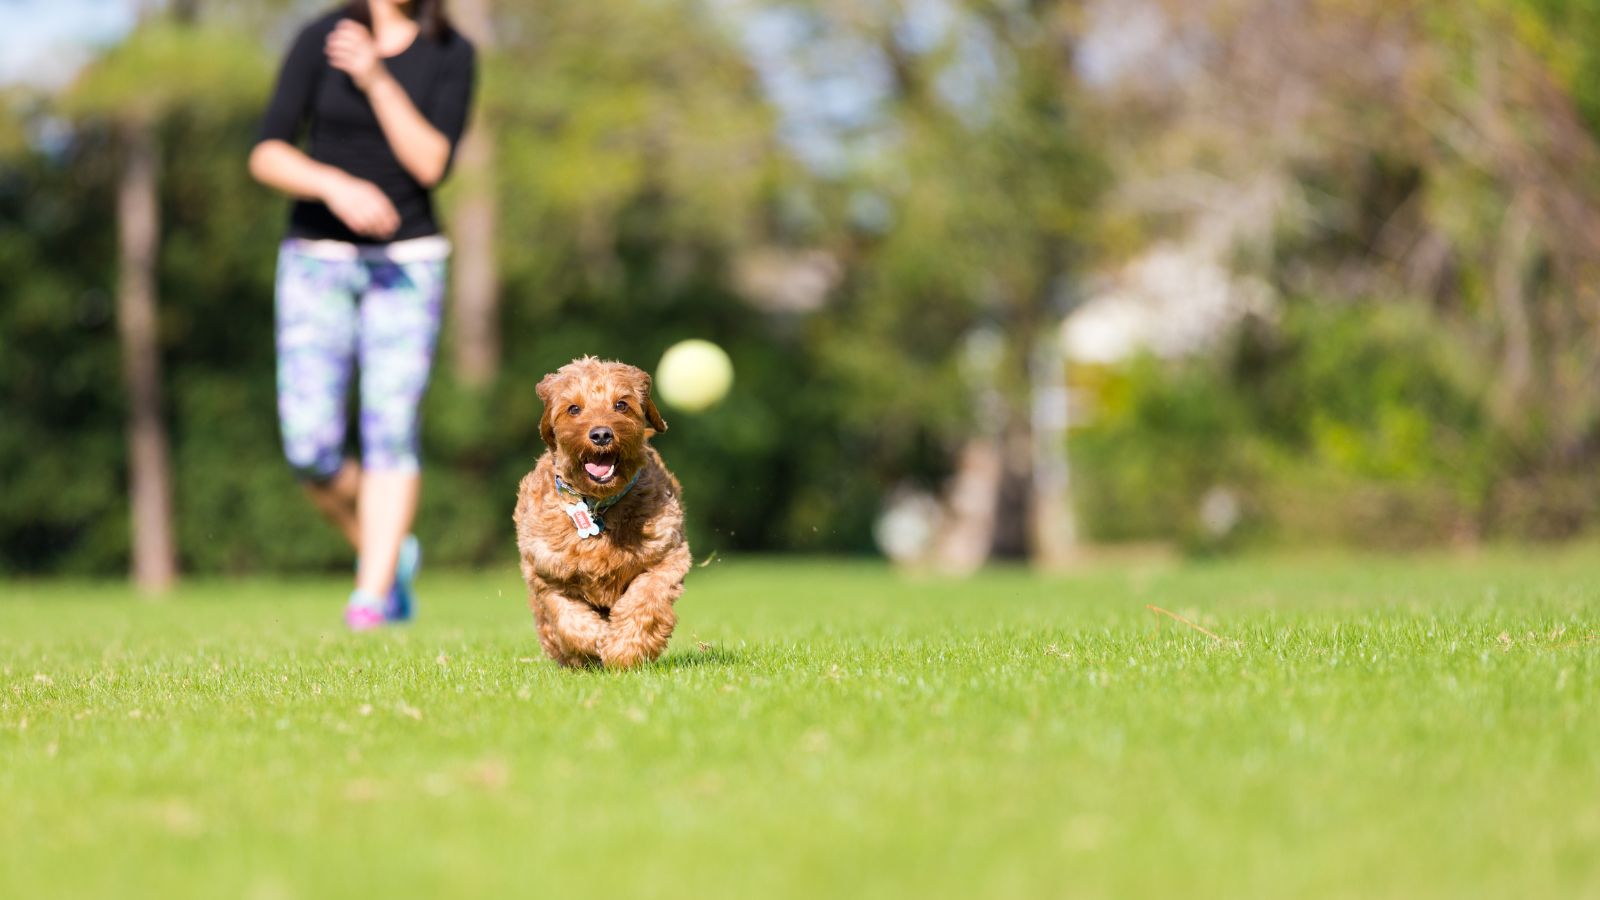 A goldendoodle chasing the ball on a field.